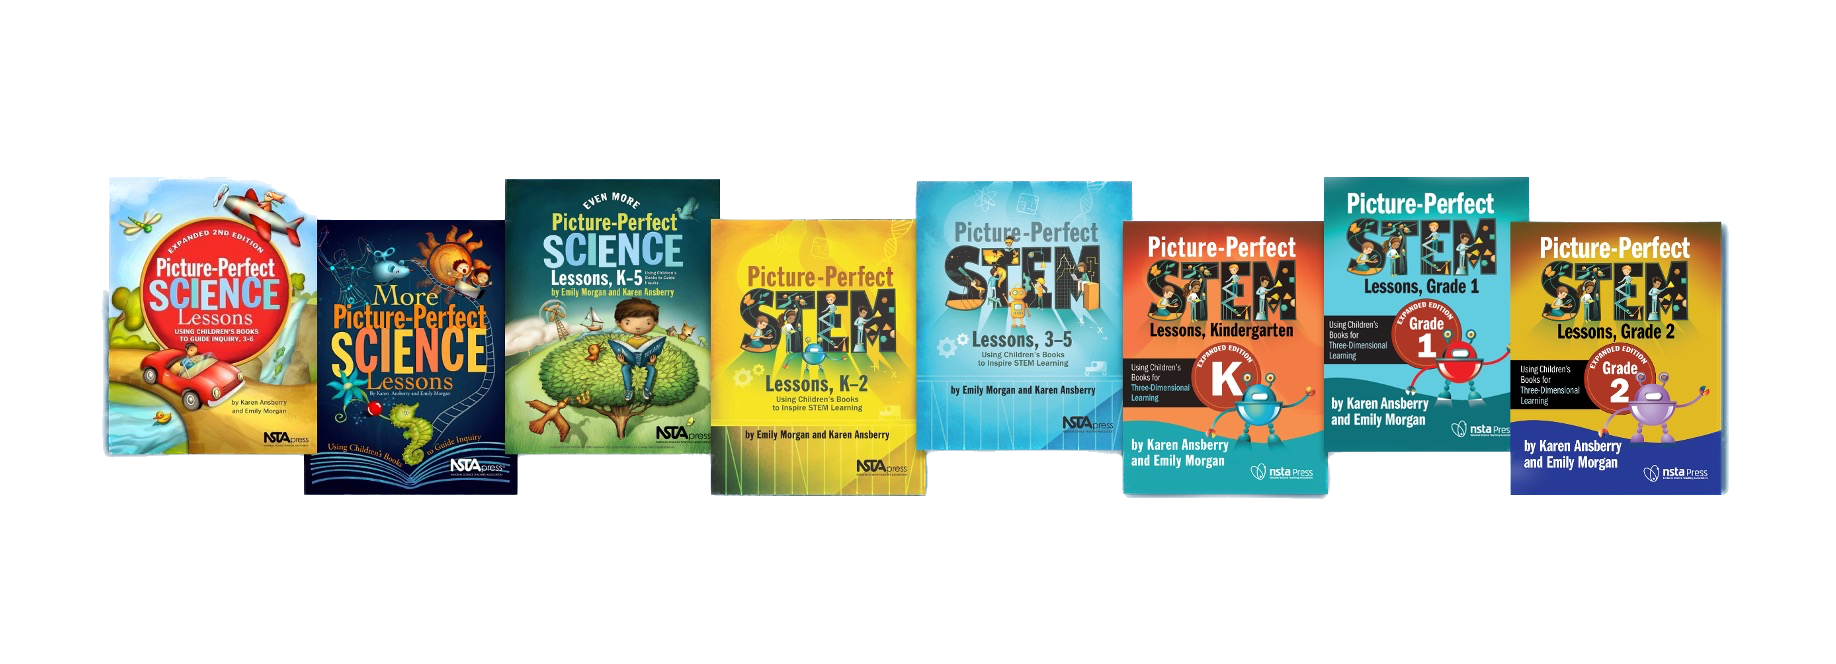 Picture-Perfect STEM Lessons, First Grade, Expanded Edition: Using  Children's Books for Three-Dimensional Learning